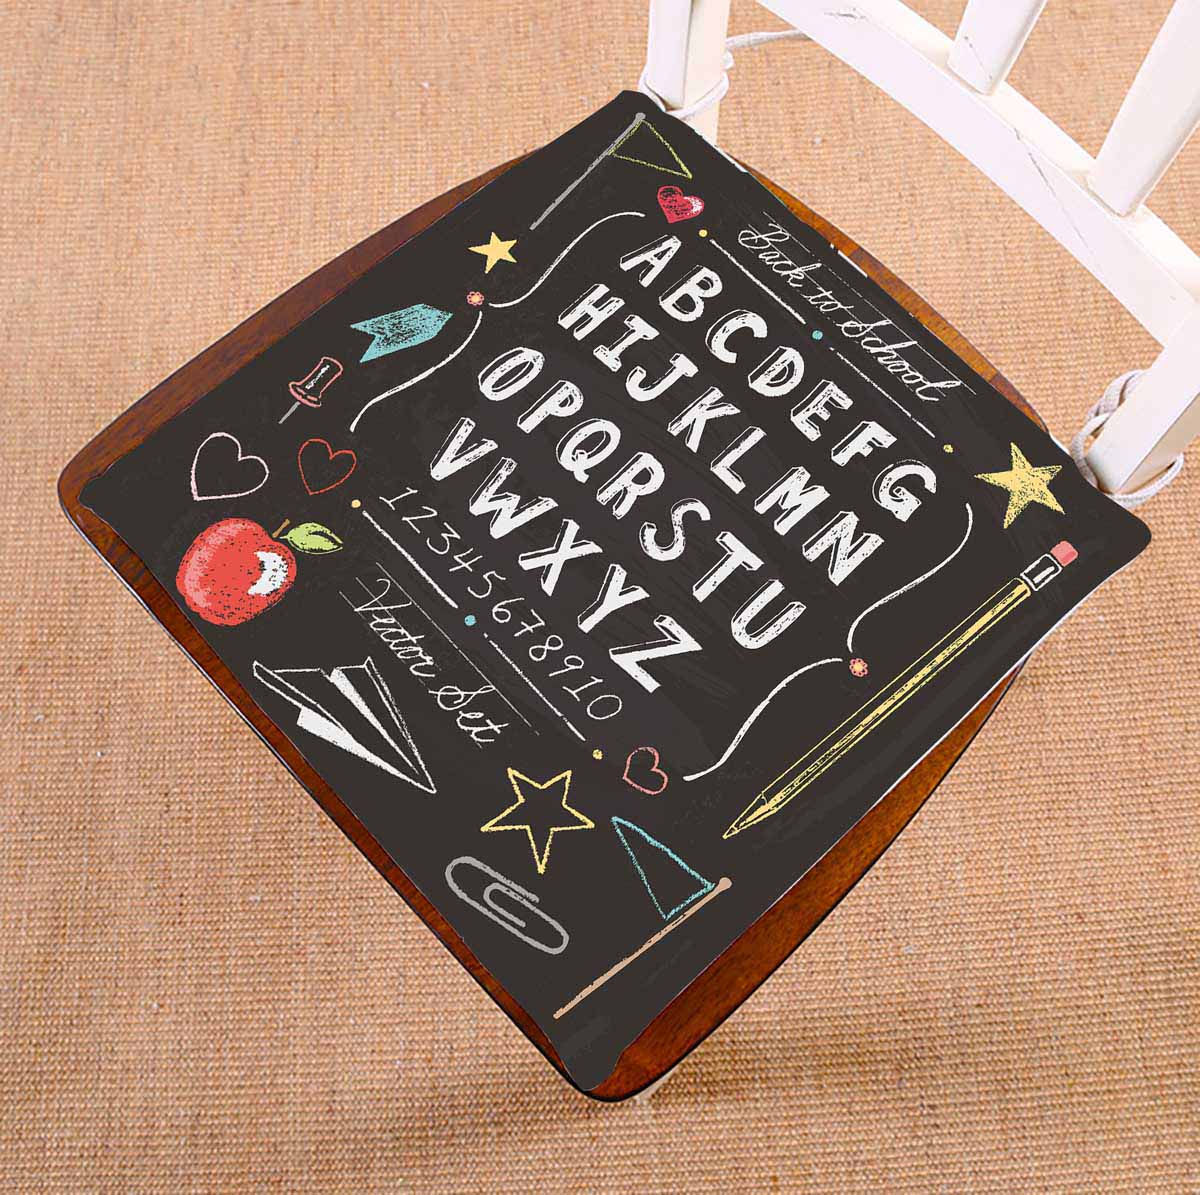 PKQWTM Vintage Back to School Chalkboard Set Chair Pads Chair Mat Seat Cushion Chair Cushion Floor Cushion Size 16x16 inches - image 1 of 1